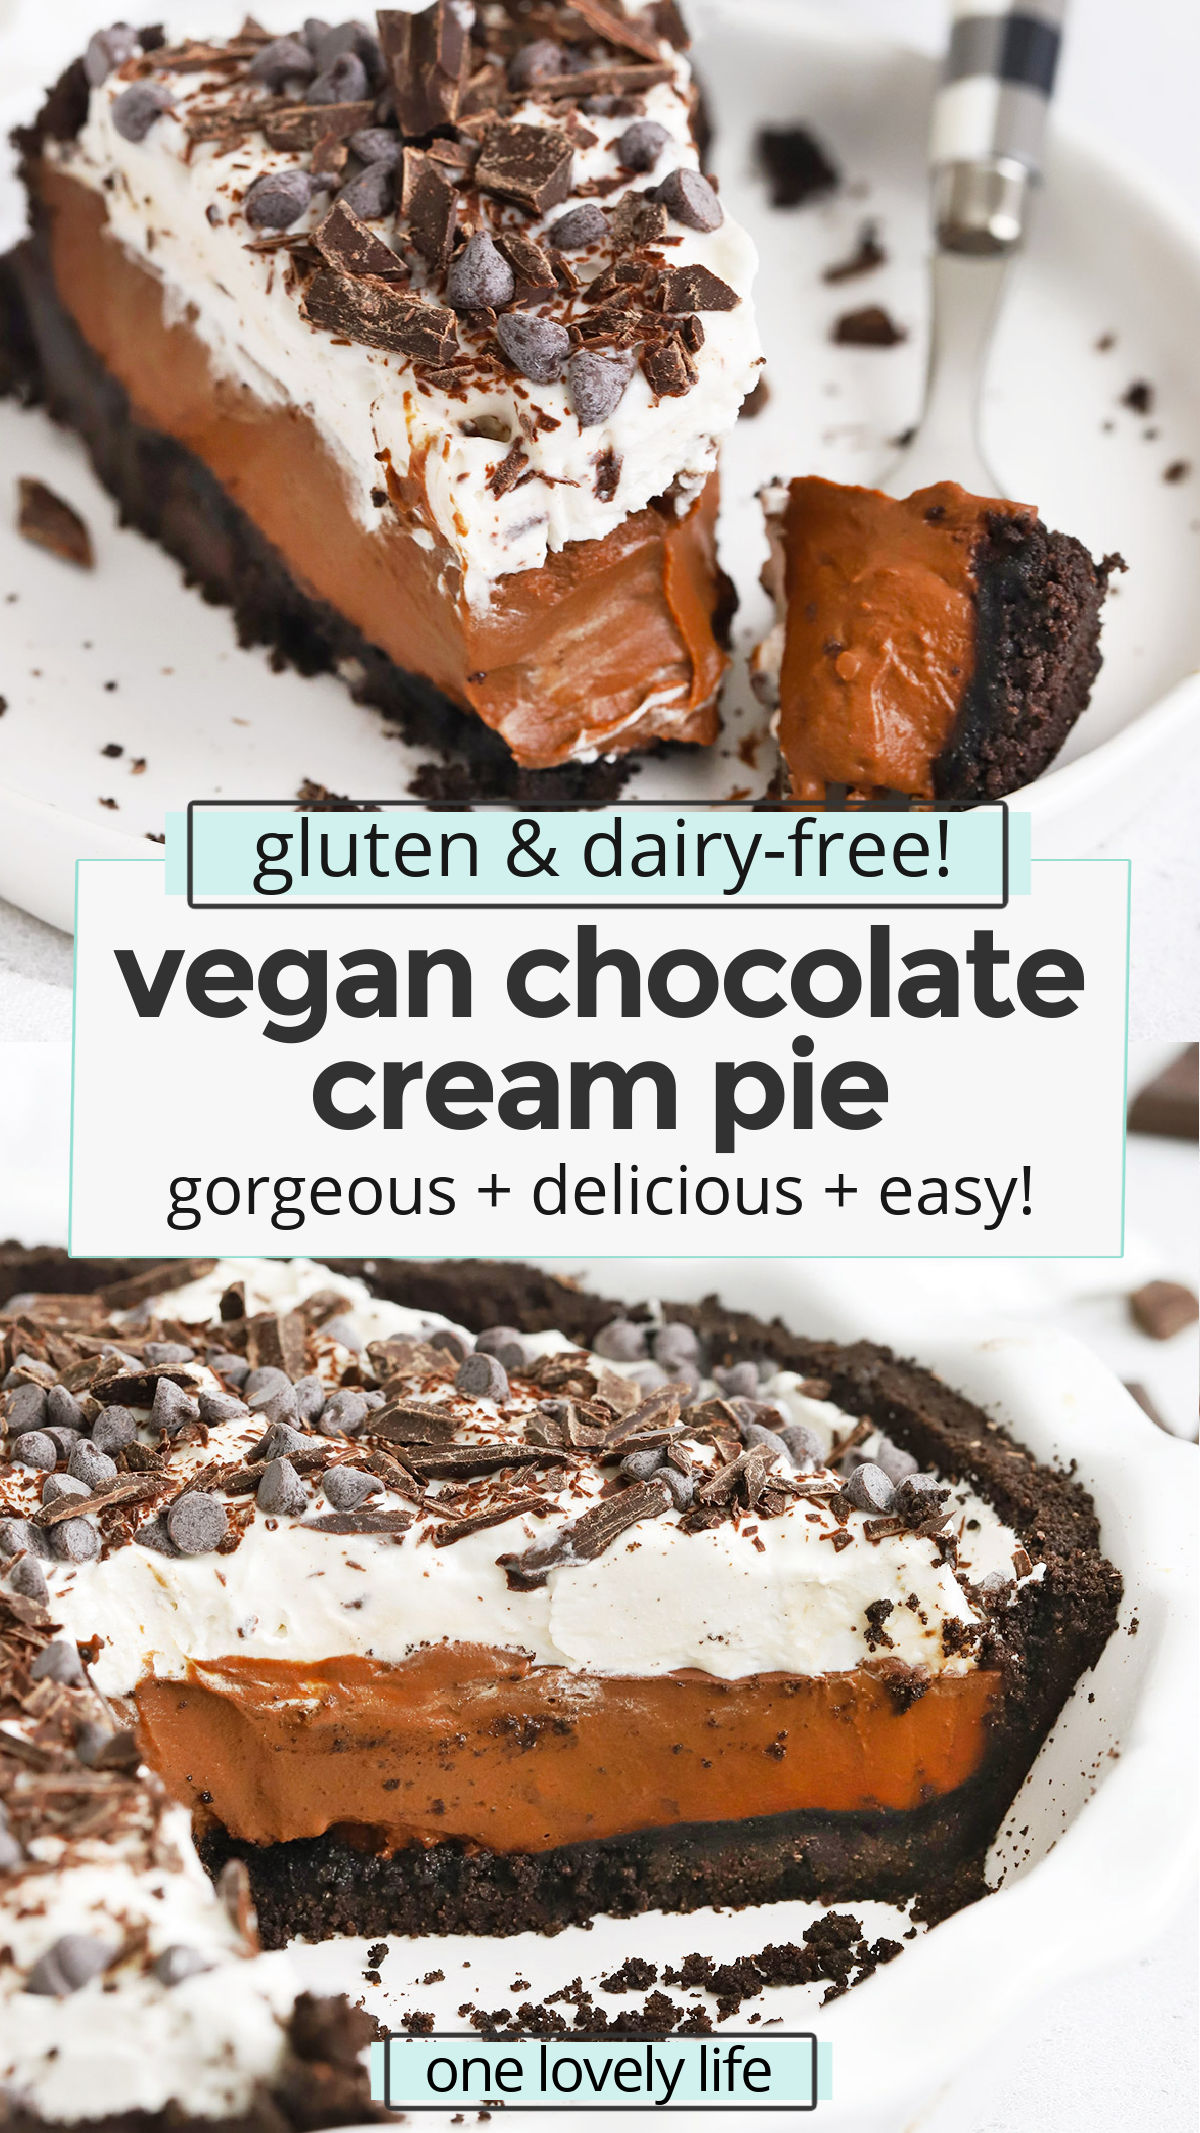 Vegan Chocolate Pie - This gorgeous dairy-free chocolate cream pie has a rich chocolatey filling and crispy chocolate cookie crust your whole family will flip for! (Gluten-Free, Dairy-Free) // Vegan Chocolate Pie // Dairy-Free Chocolate Pie // Vegan Chocolate Pudding Pie // Dairy-Free Chocolate cream pie #chocolate #chocolatepie #glutenfreepie #thanskgiving #vegan #glutenfree